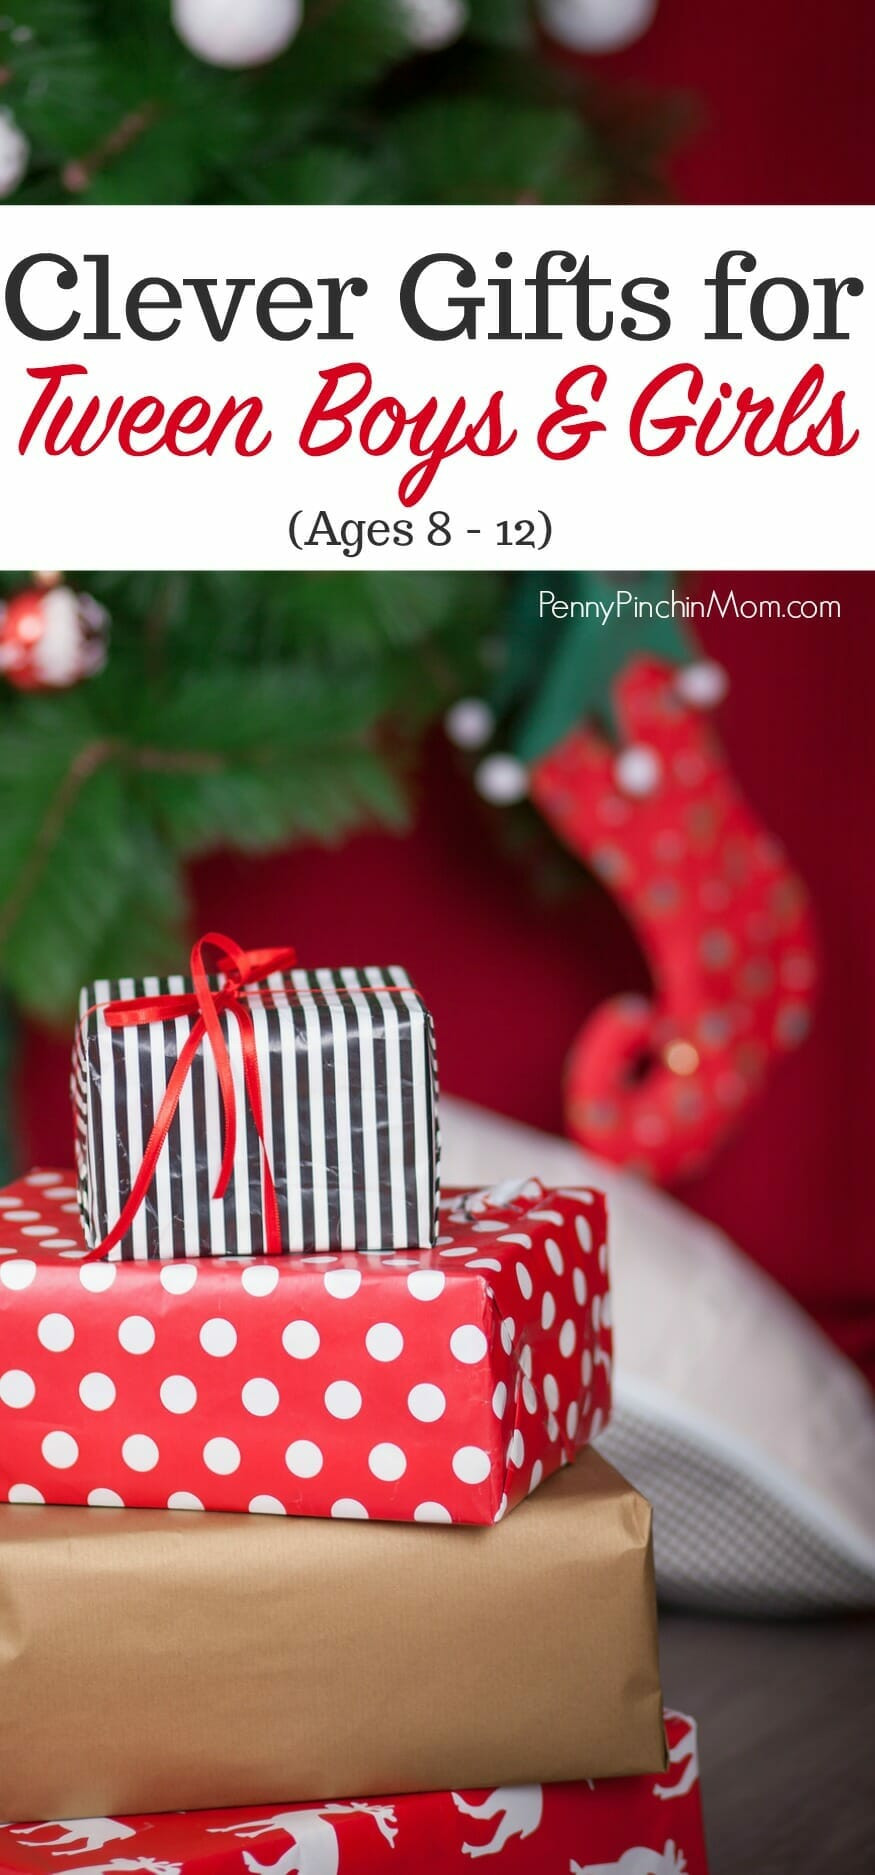 Gift Ideas For Boys 12
 Gift Ideas for Kids Ages 8 12 For Girls and Boys